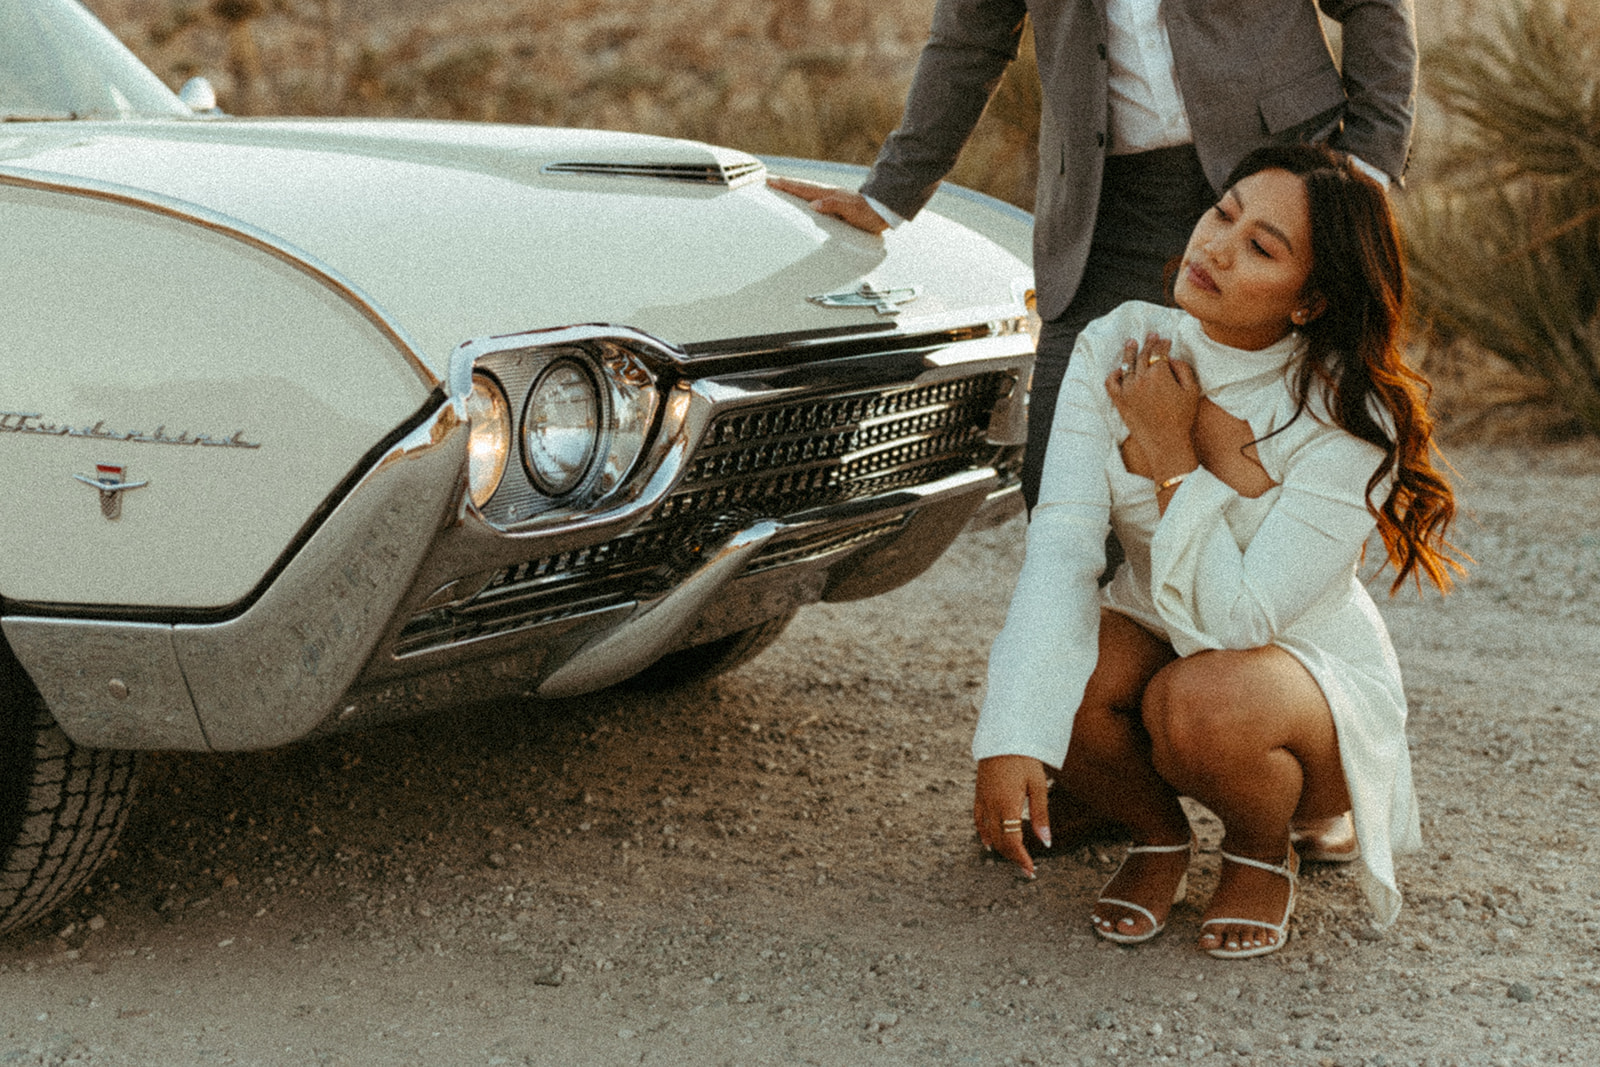 classic car engagement photos in joshua tree national park